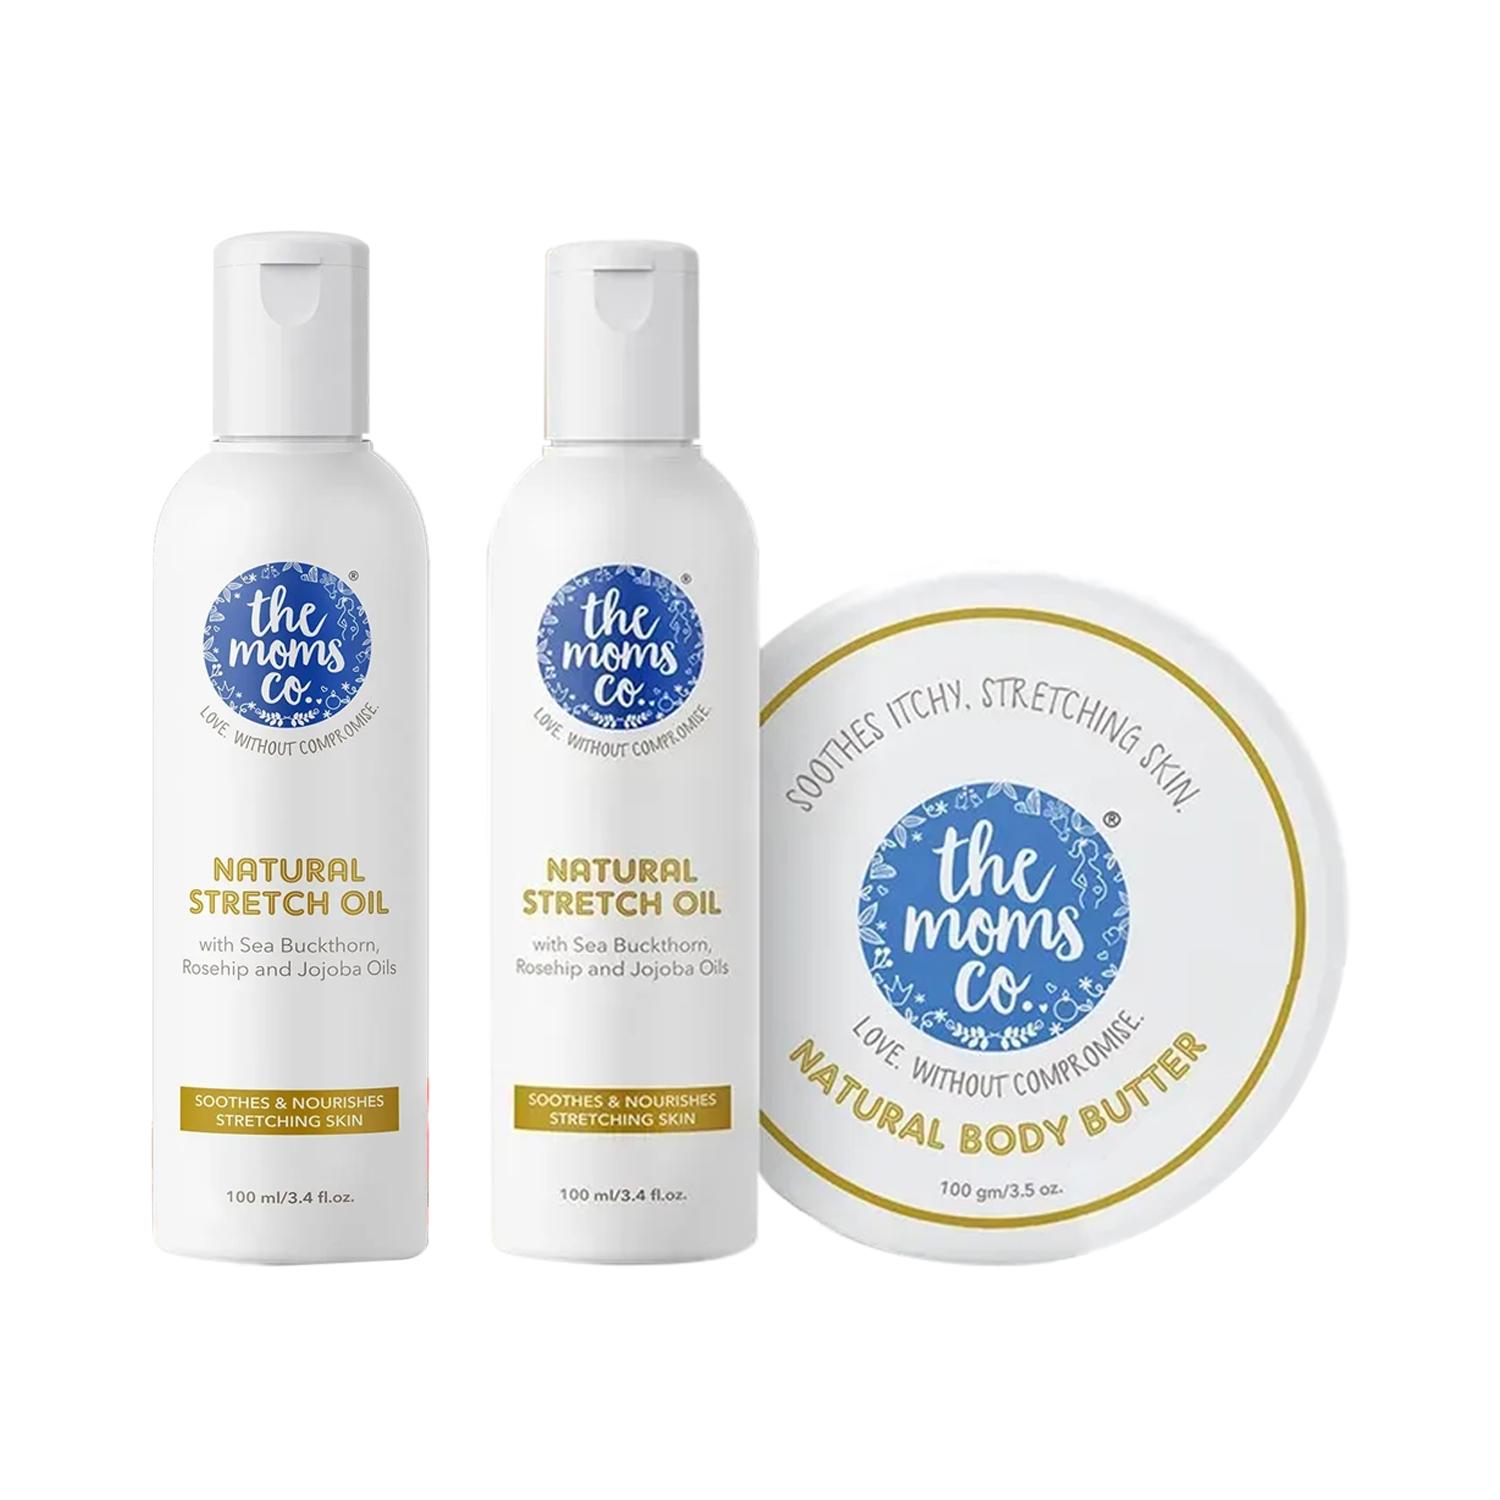 The Mom's Co. | The Mom's Co. Natural Stretch Oil (100ml) & Natural Stretch Marks Bundle (100gm+100ml) 1's Combo